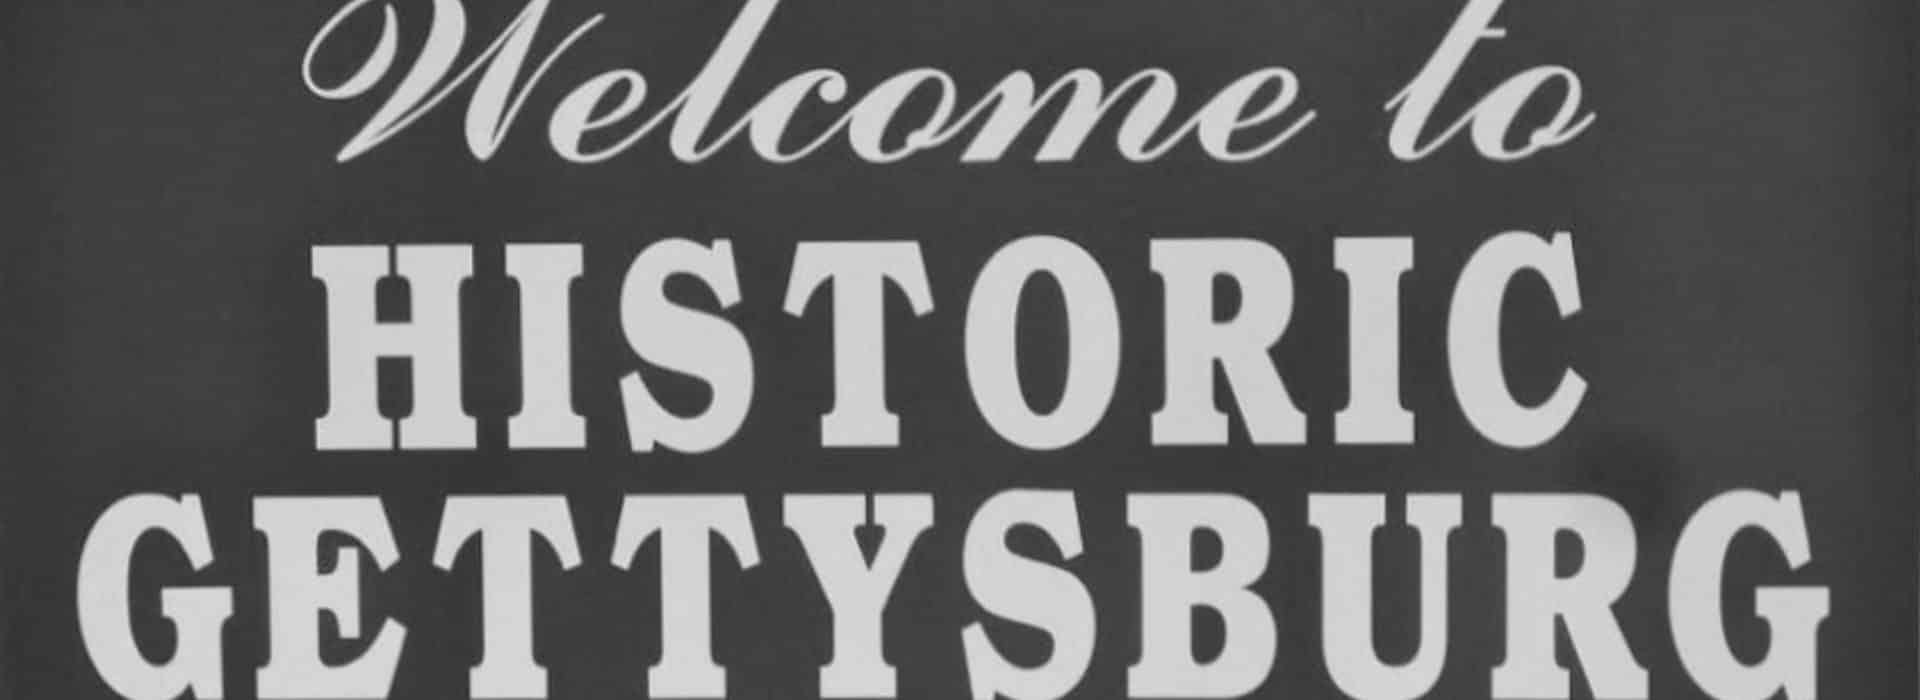 Black and white sign with text Welcome to Historic Gettysburg